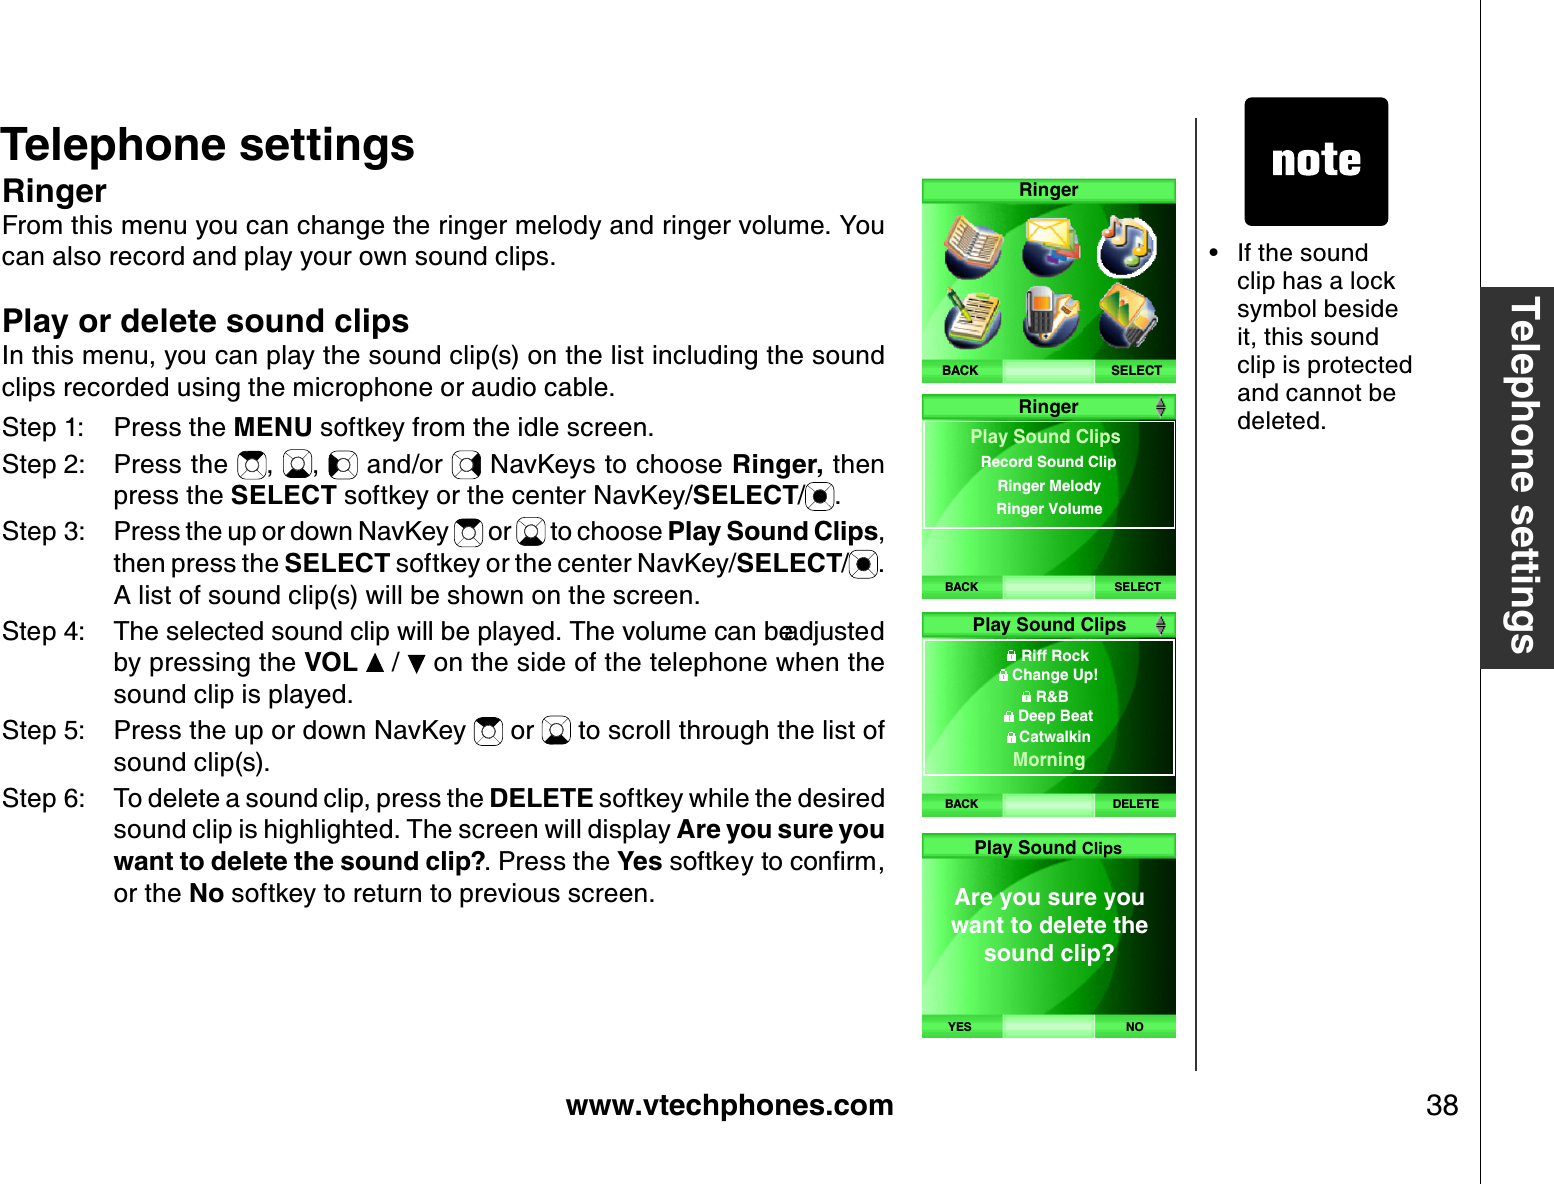 www.vtechphones.com 38Telephone settingsTelephone settingsRingerFrom this menu you can change the ringer melody and ringer volume. You can also record and play your own sound clips.Play or delete sound clipsIn this menu, you can play the sound clip(s) on the list including the sound clips recorded using the microphone or audio cable.Step 1: Press the MENU softkey from the idle screen.Step 2: Press the  , ,  and/or   NavKeys to choose Ringer, then press the SELECT softkey or the center NavKey/SELECT/.Step 3: Press the up or down NavKey   or   to choose Play Sound Clips,then press the SELECT softkey or the center NavKey/SELECT/.A list of sound clip(s) will be shown on the screen. 5VGR 6JGUGNGEVGFUQWPFENKRYKNNDGRNC[GF6JGXQNWOGECPDGCFLWUVGFby pressing the VOL  /   on the side of the telephone when the sound clip is played.Step 5: Press the up or down NavKey   or   to scroll through the list of sound clip(s).Step 6: To delete a sound clip, press the DELETE softkey while the desired sound clip is highlighted. The screen will display Are you sure you want to delete the sound clip?. Press the YesUQHVMG[VQEQPſTOor the No softkey to return to previous screen.If the sound clip has a lock symbol beside it, this sound clip is protected and cannot be deleted. •SELECTR ingerB ACKBACK SELECTRingerPlay Sound ClipsRinger Melody Ringer Volume Record Sound ClipBACK DELETEPlay Sound Clips  Riff Rock Change Up!R&amp;BDeep BeatCatwalkin  MorningAre you sure you want to delete the sound clip? YES N OPlay Sound Clips